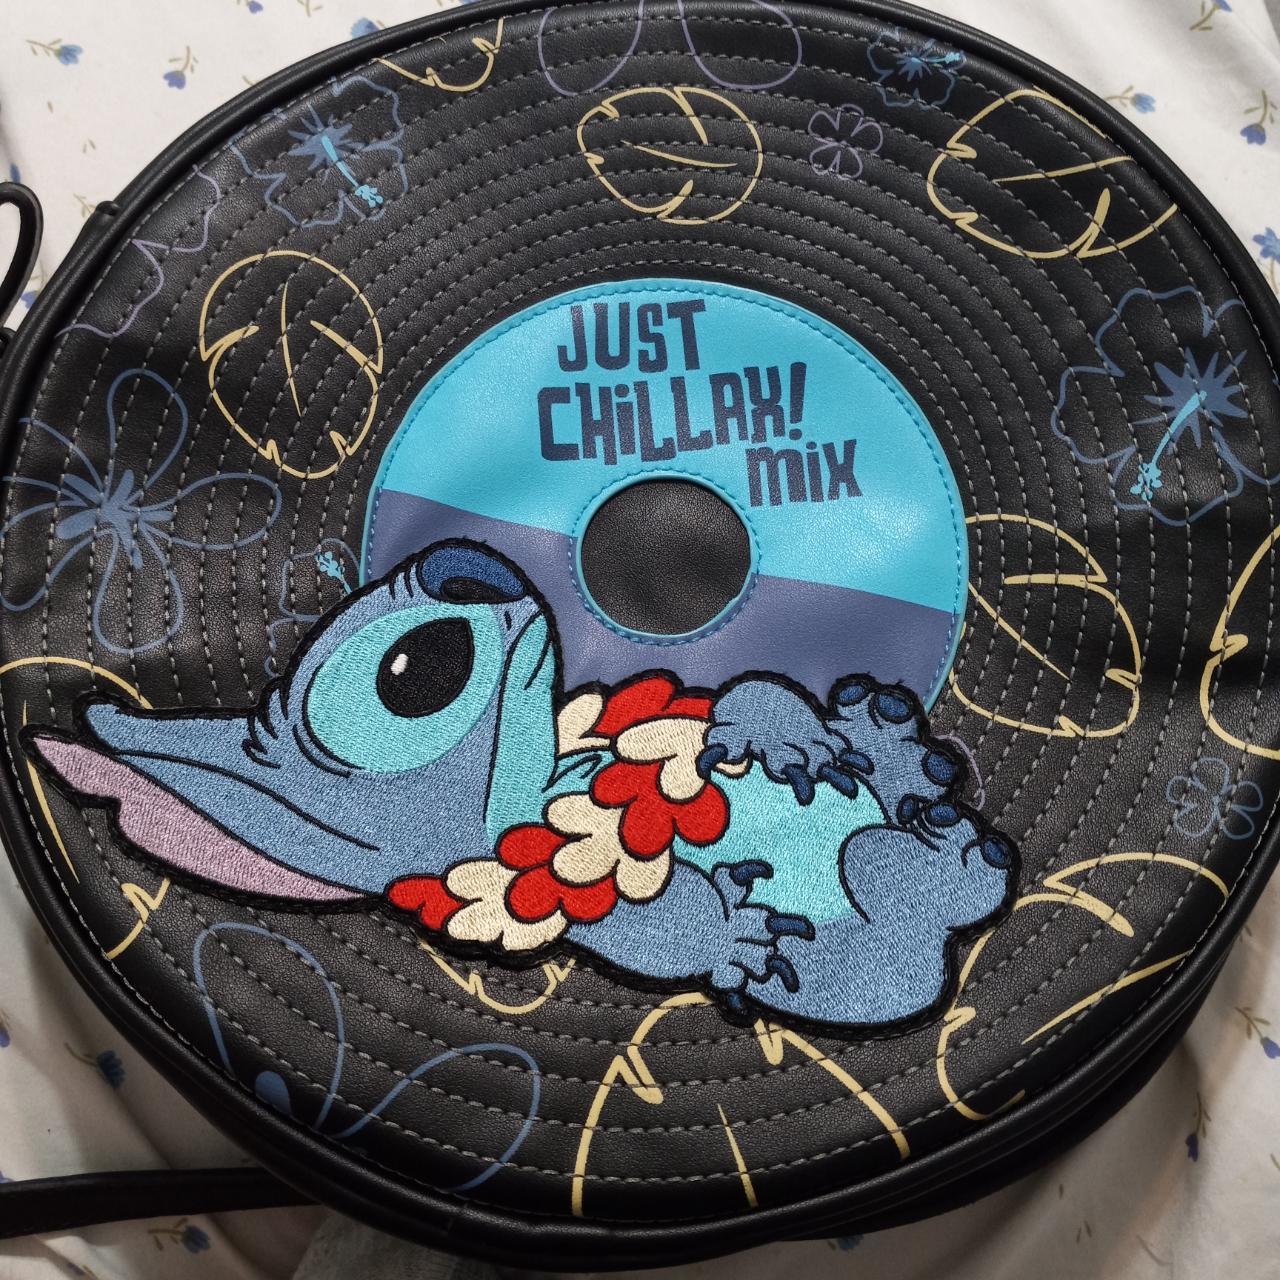 Adorable embroidery stich purse to carry around - Depop